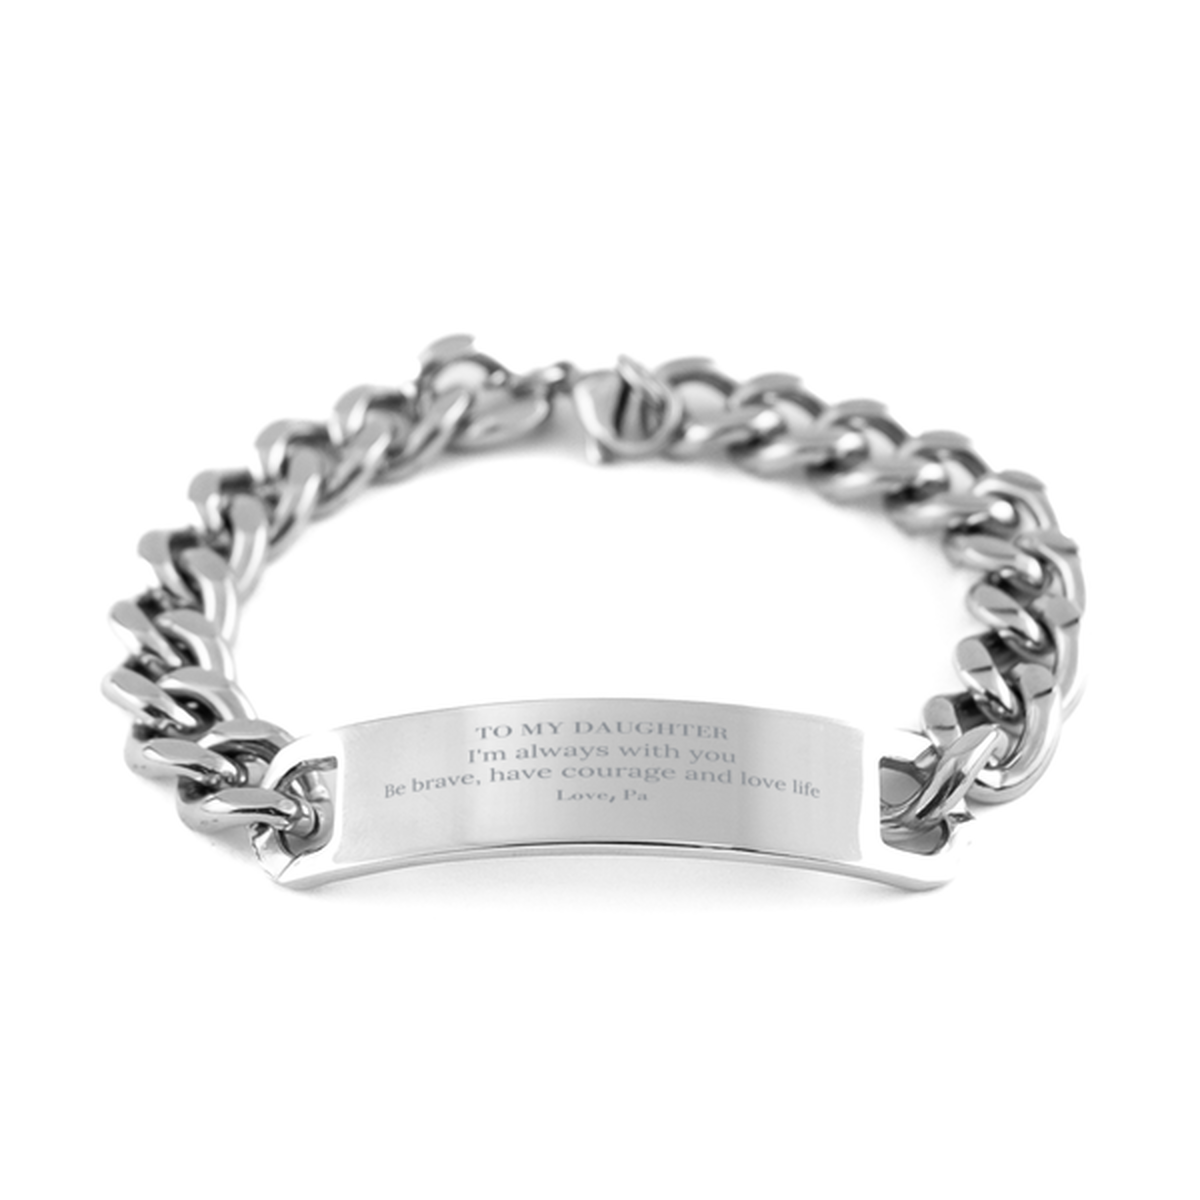 To My Daughter Gifts from Pa, Unique Cuban Chain Stainless Steel Bracelet Inspirational Christmas Birthday Graduation Gifts for Daughter I'm always with you. Be brave, have courage and love life. Love, Pa